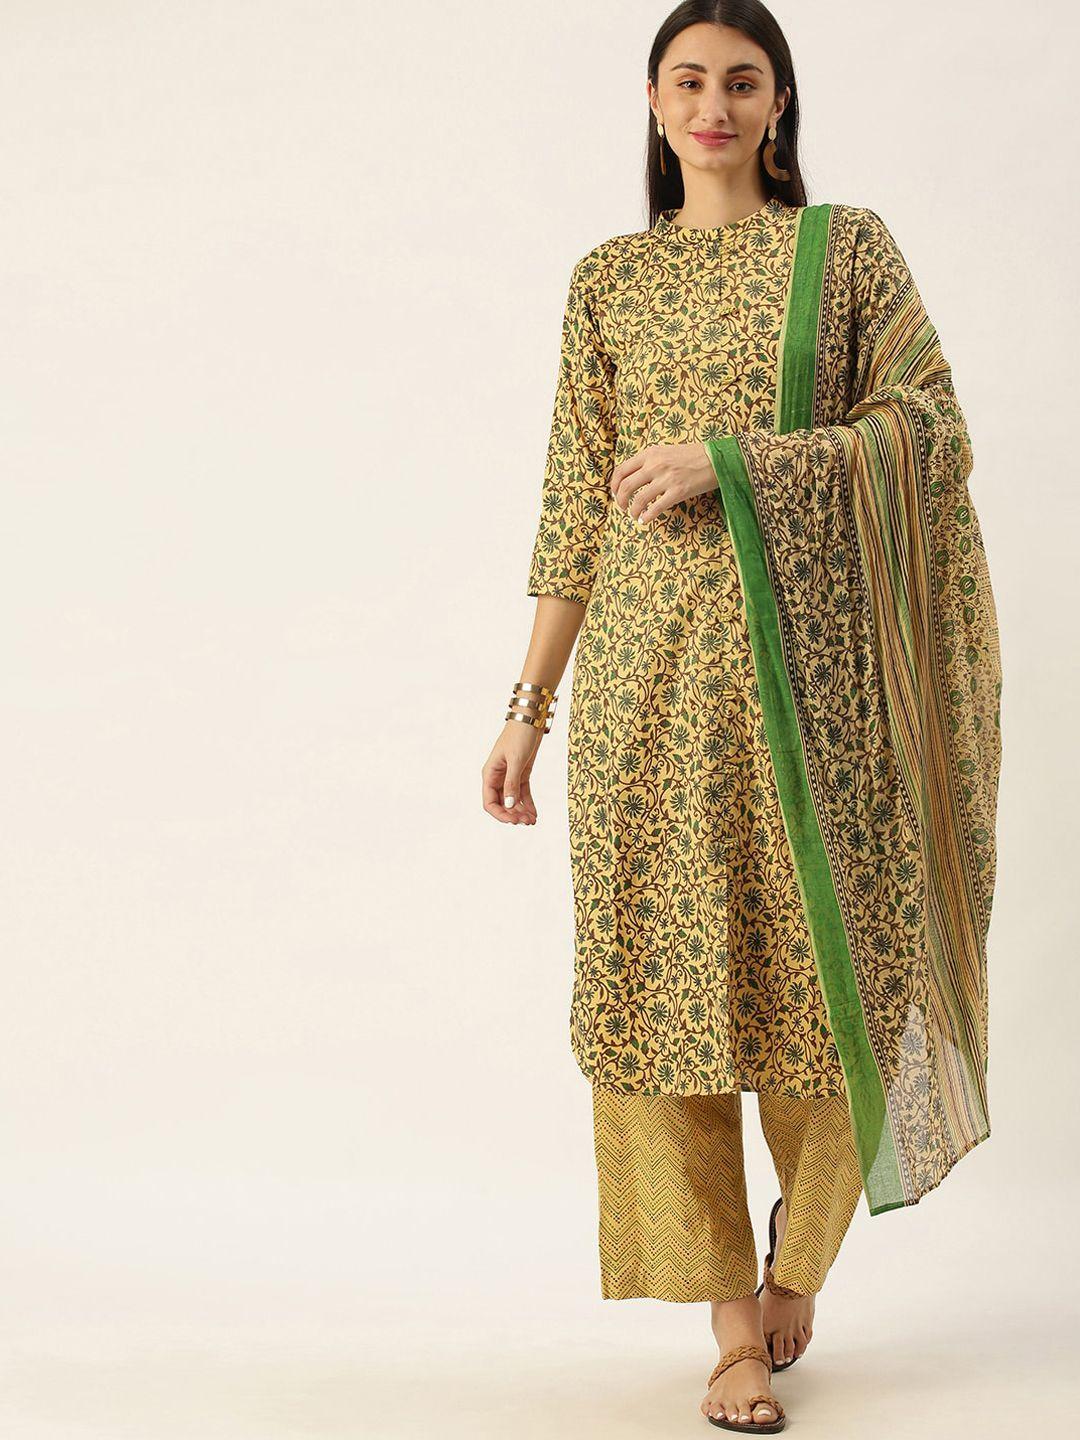 somras women mustard yellow floral printed pure cotton kurta with palazzos & with dupatta